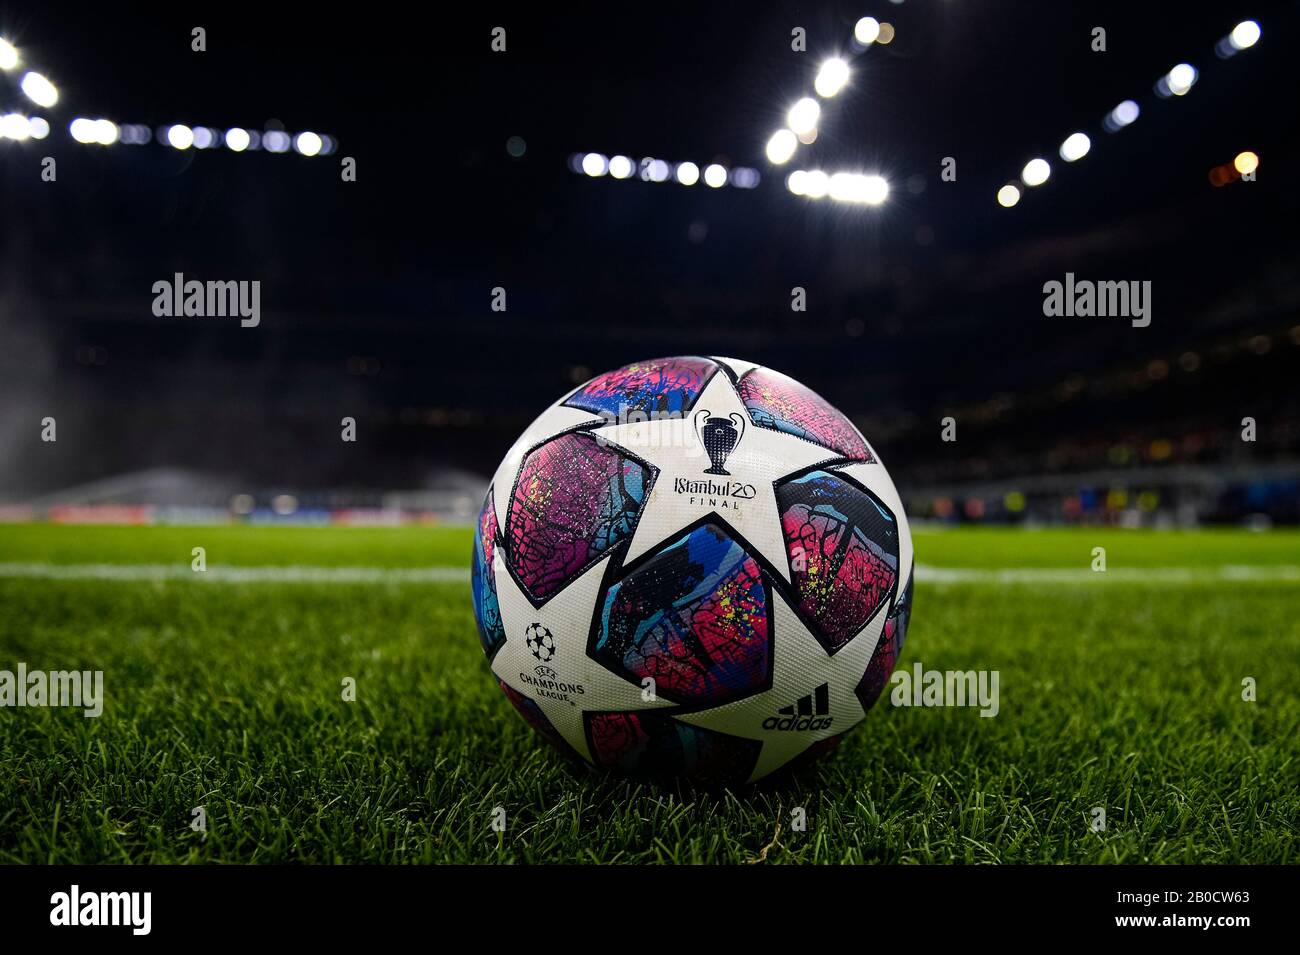 Page 2 Adidas Champions League Ball Uefa High Resolution Stock Photography And Images Alamy